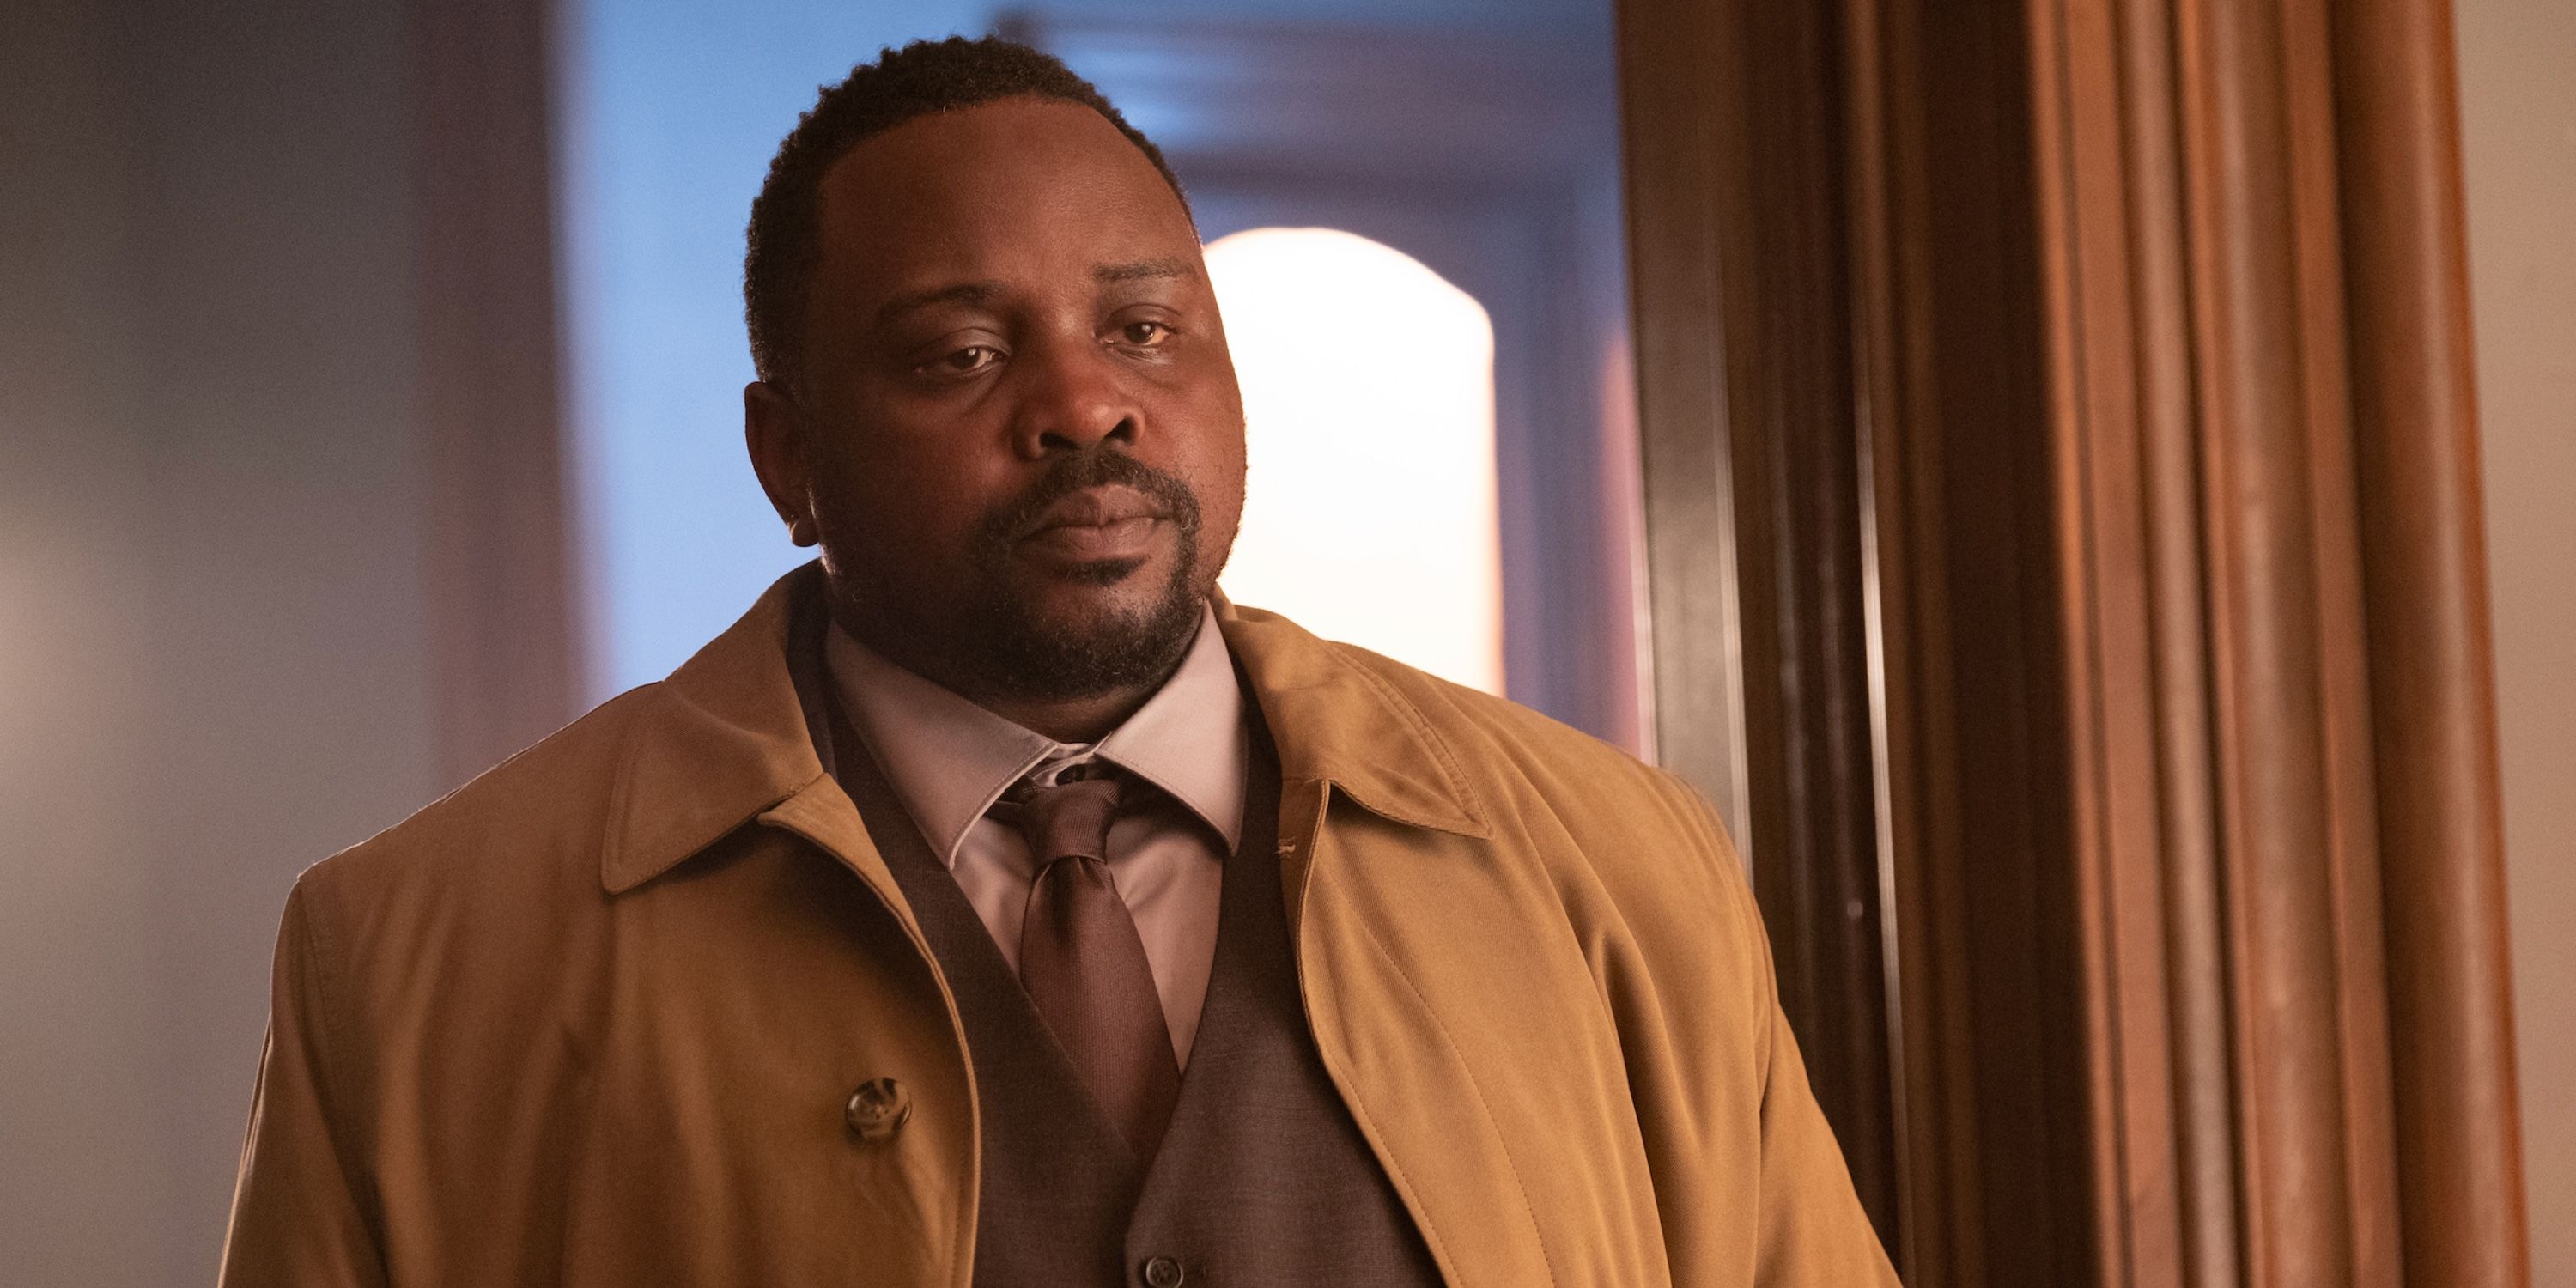 Brian Tyree Henry as Detective Little in The Woman in the Window on Netflix